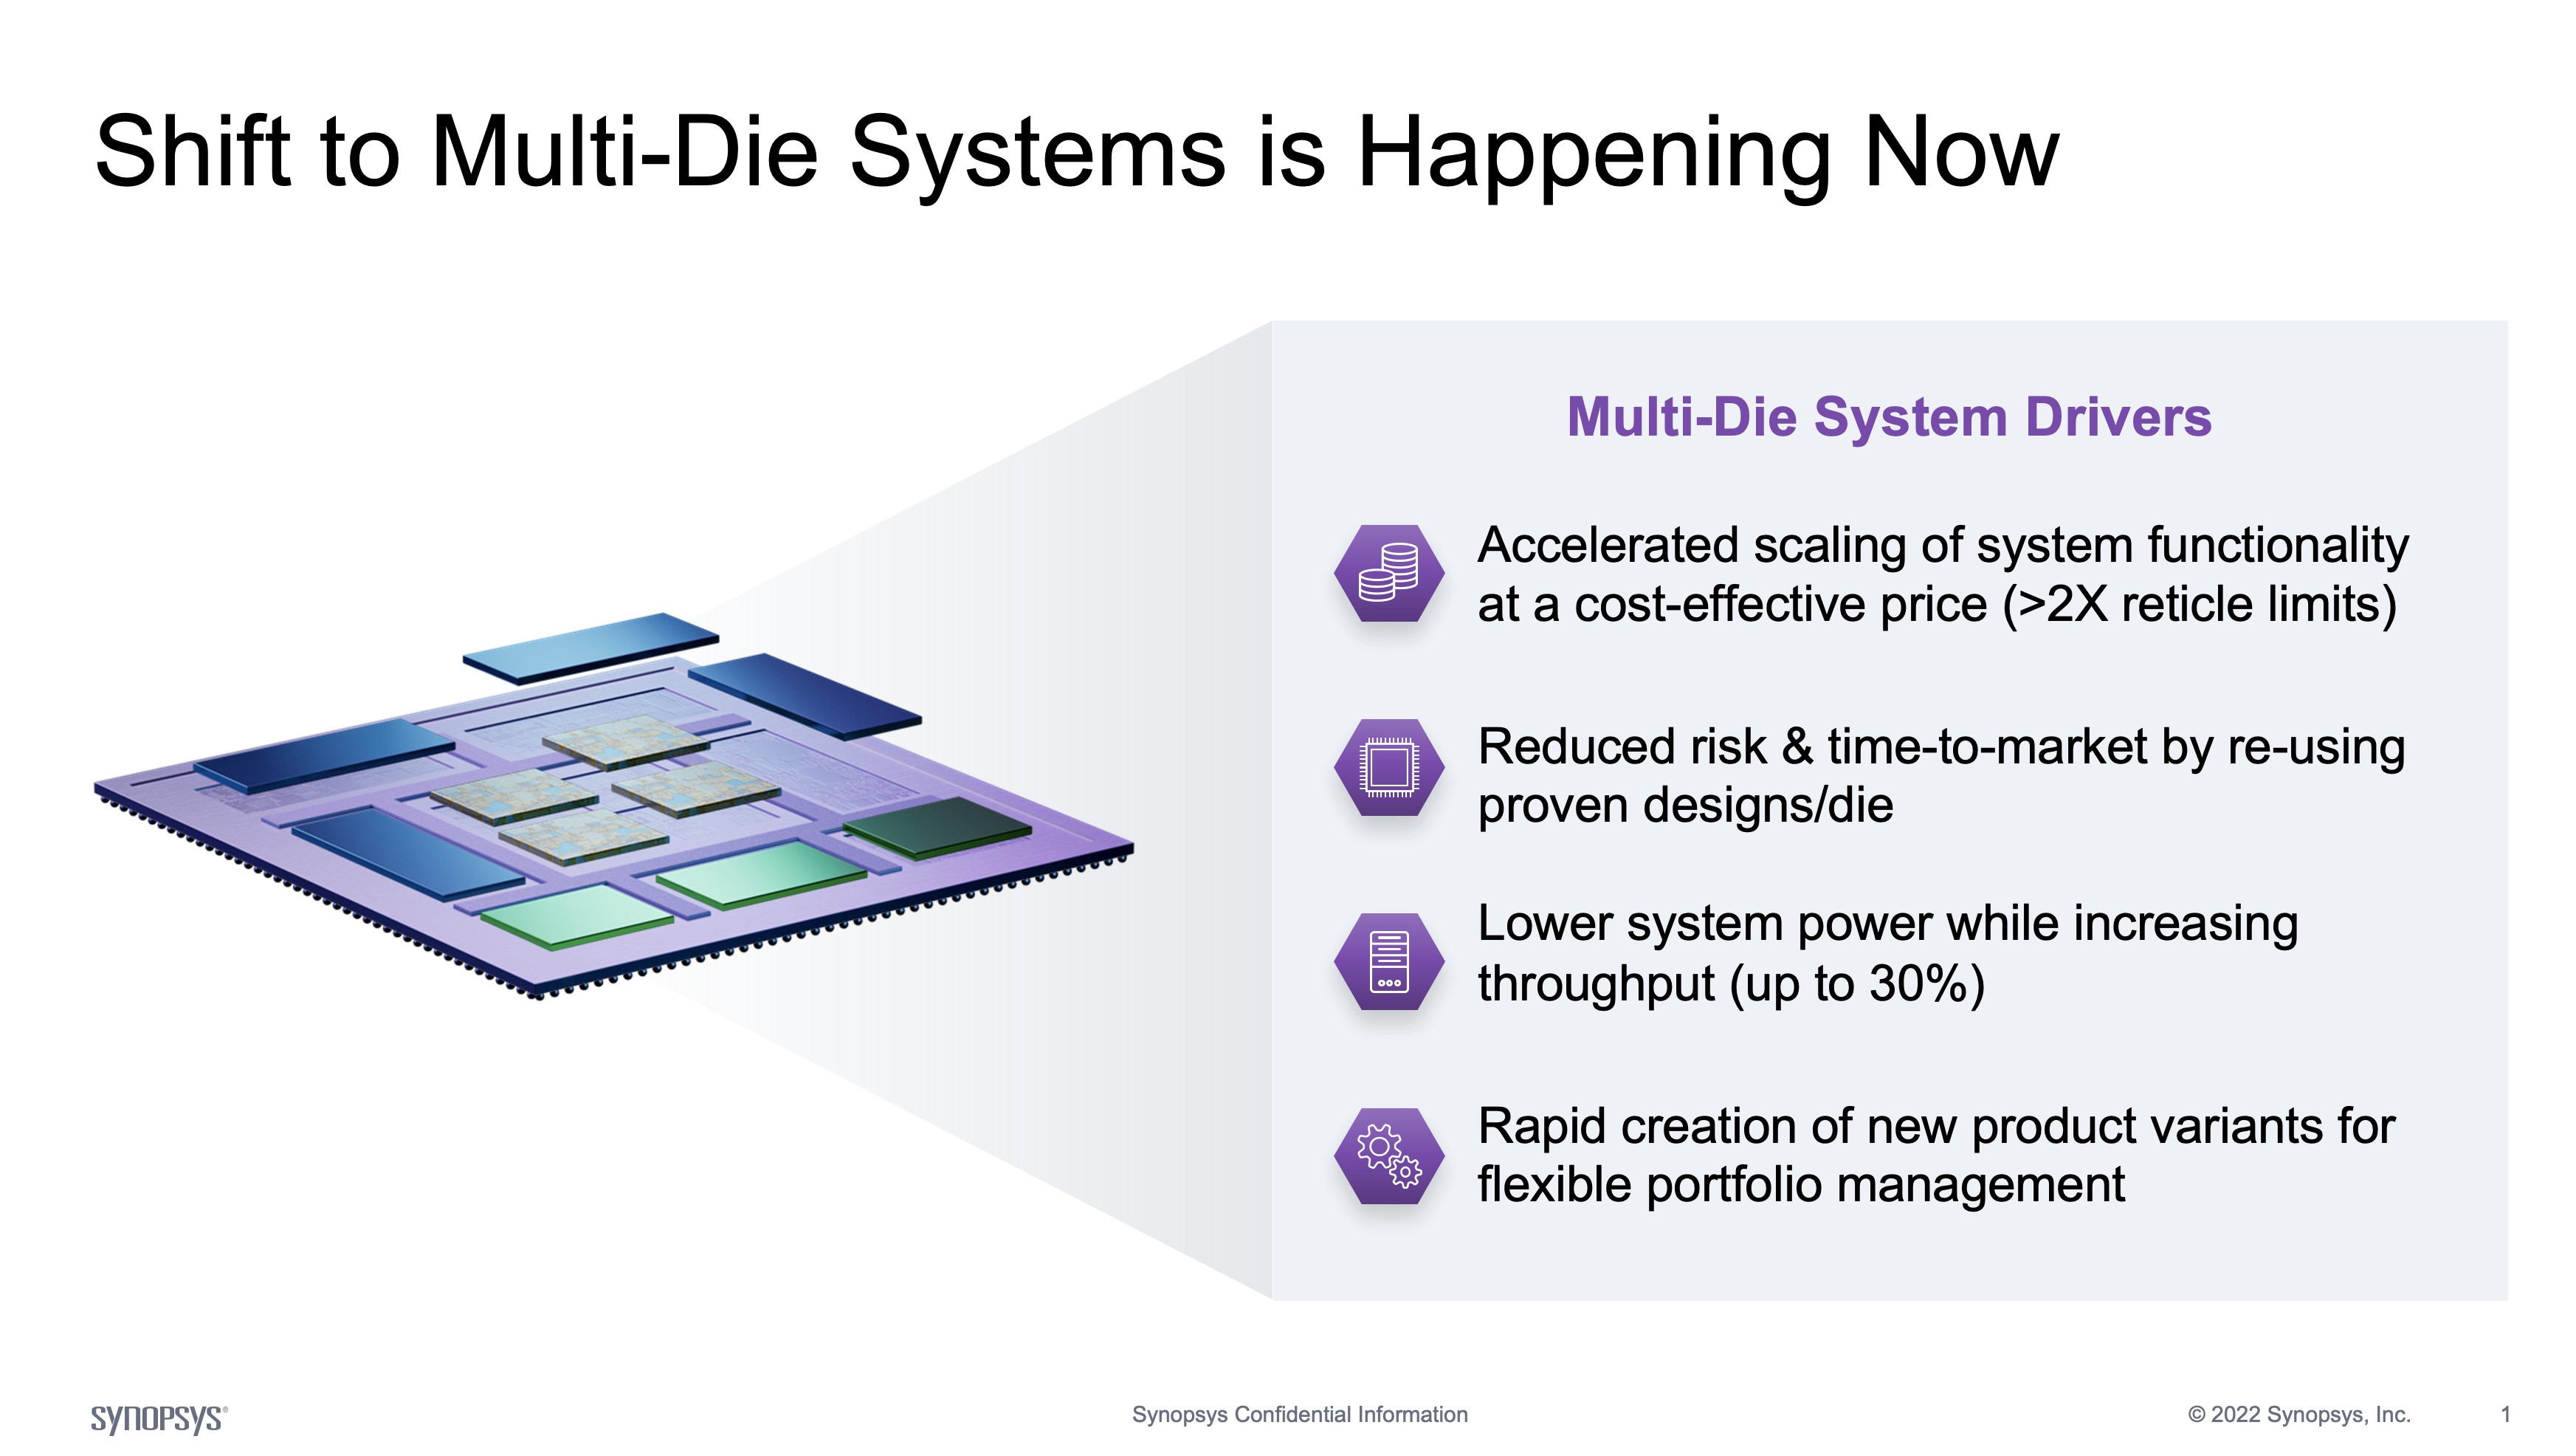 Shift to Multi Die Systems is Happening Now